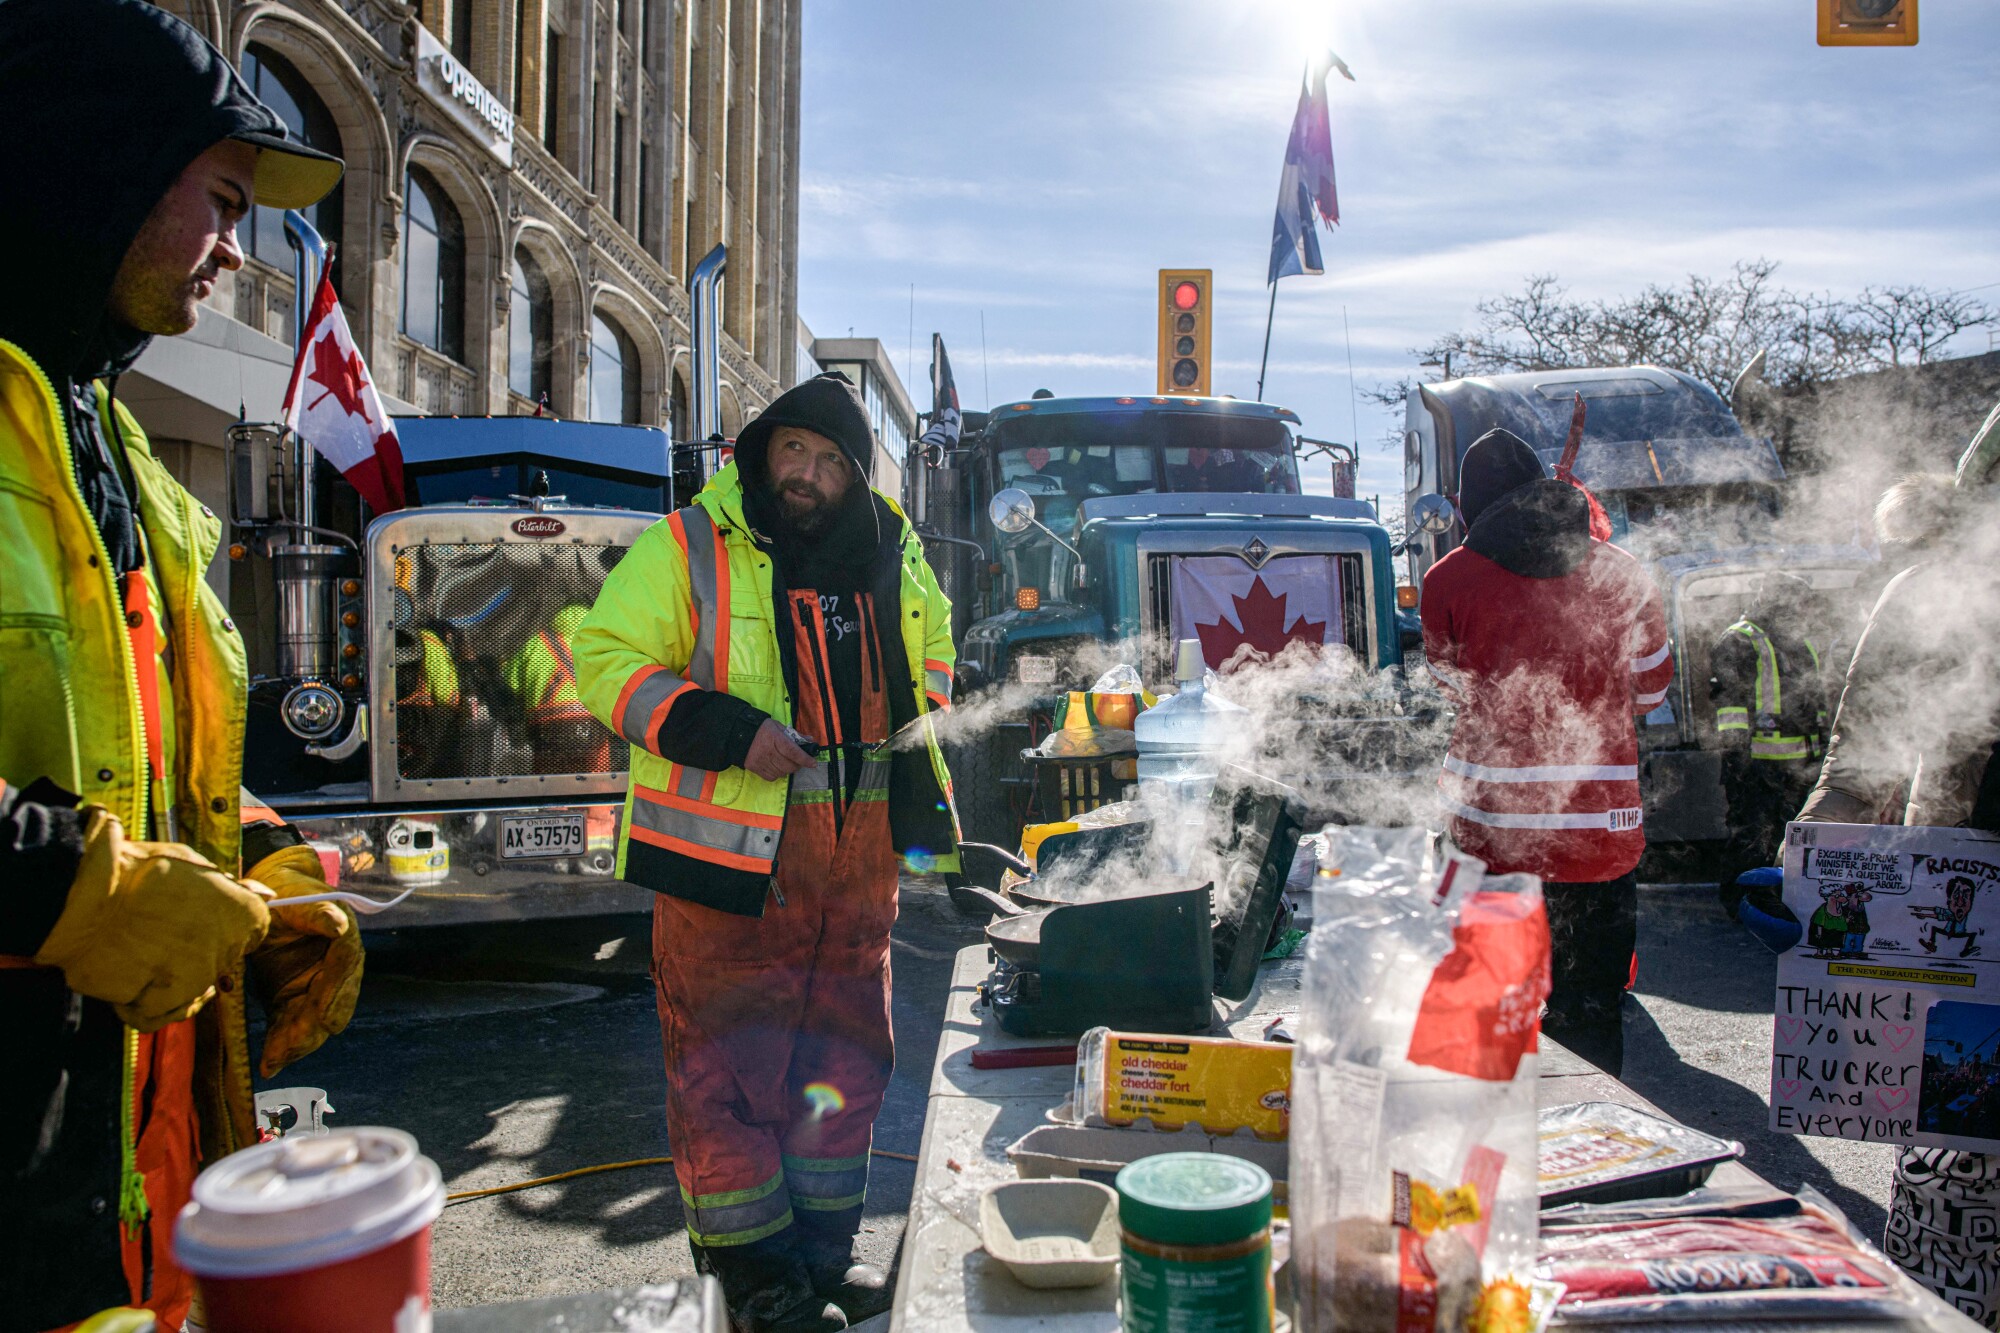 Steam rises from pans as demonstrators cook breakfast on the side of the street with big-rigs in the background